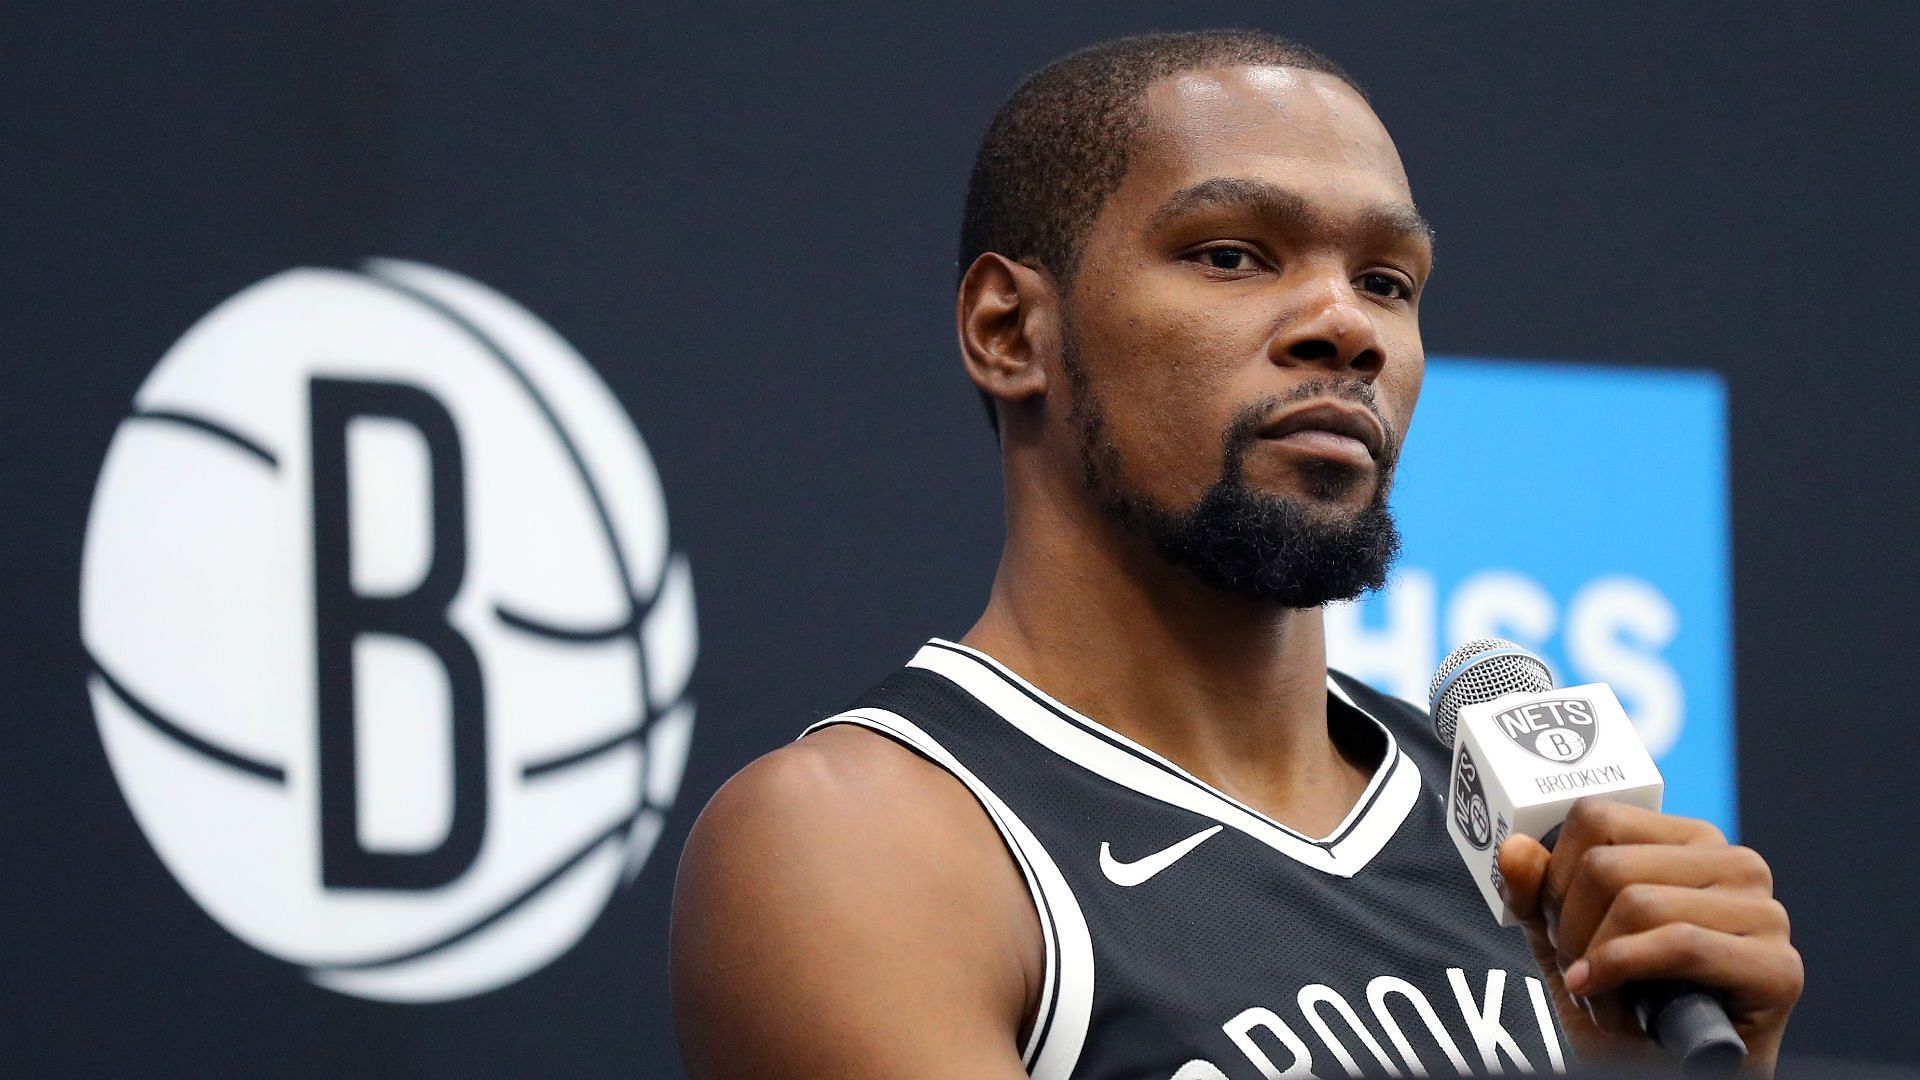 The Brooklyn Nets will be in a world of trouble if Kevin Durant falters due to his extended playing time. [Photo: NJ.com]